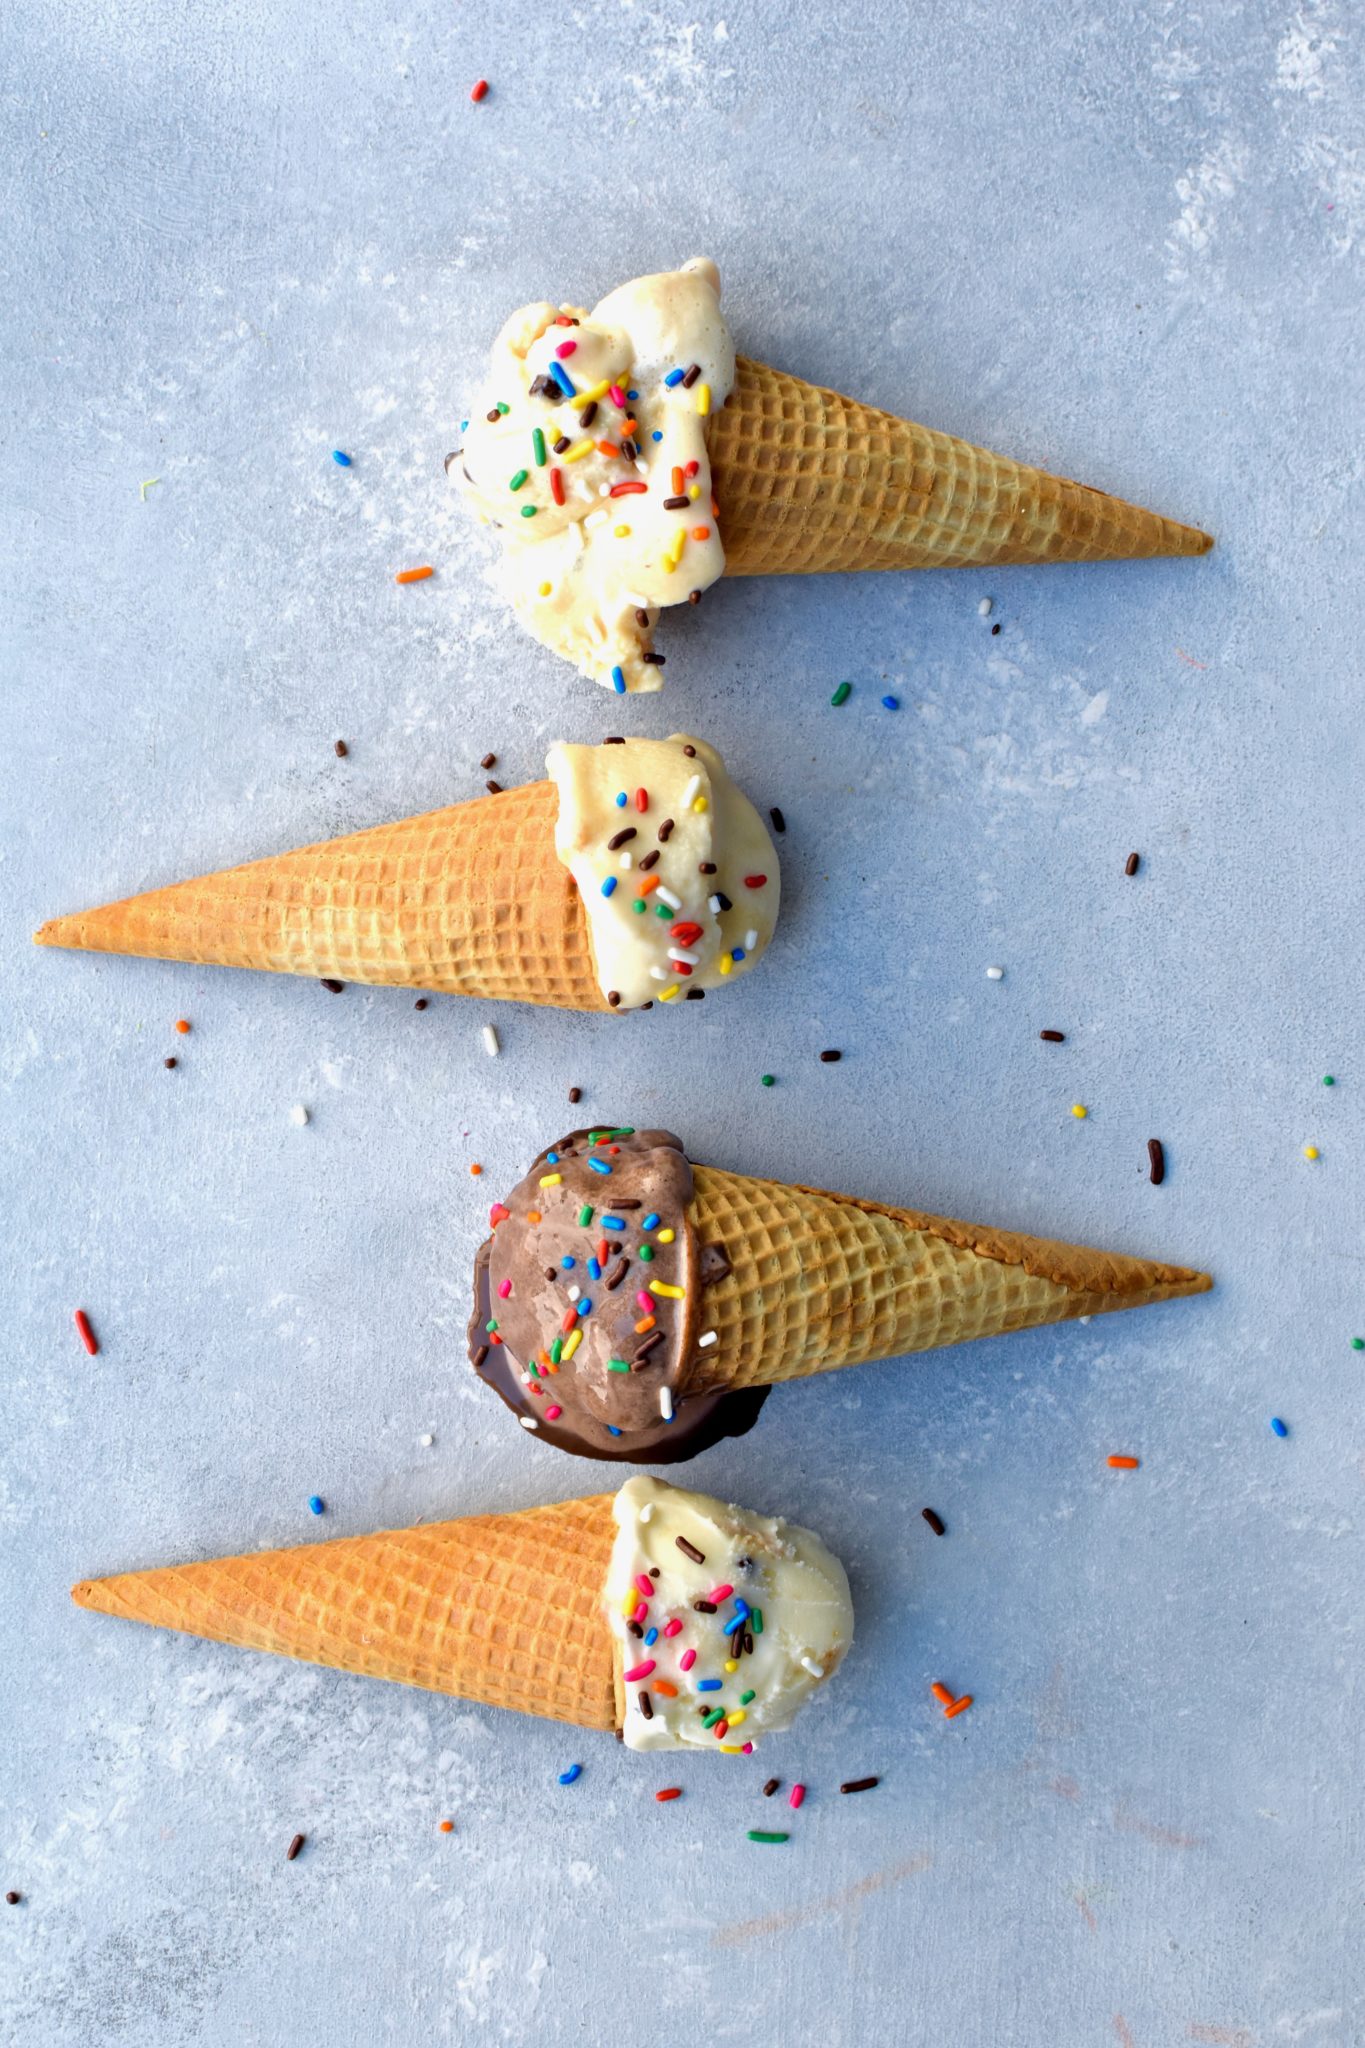 5 ways to celebrate summer with ice cream // cait's plate